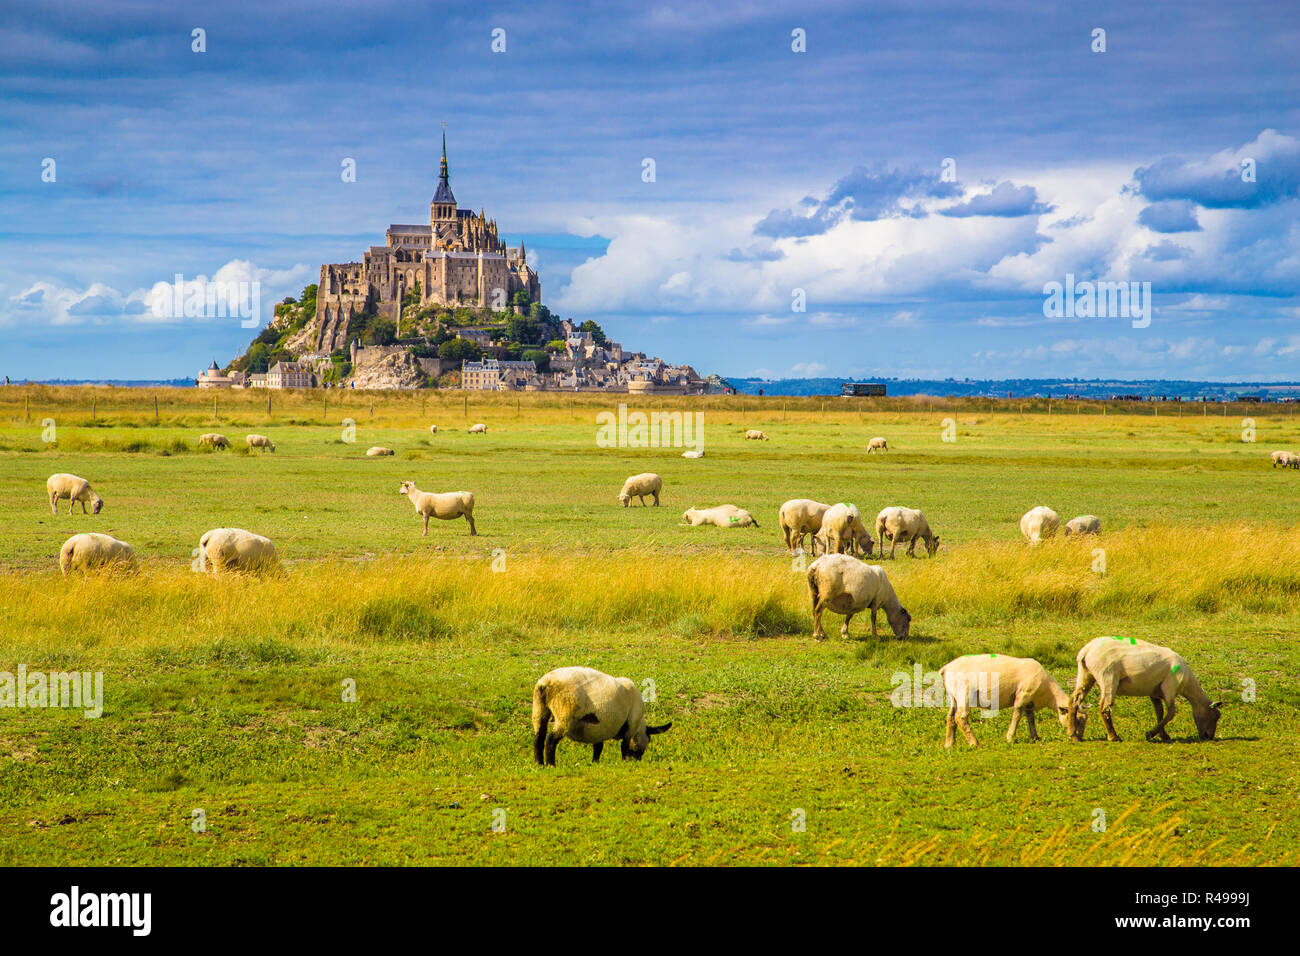 Famous Le Mont Saint-Michel tidal island with sheep grazing on fields of fresh green grass on a sunny day with blue sky and clouds, Normandy, France Stock Photo